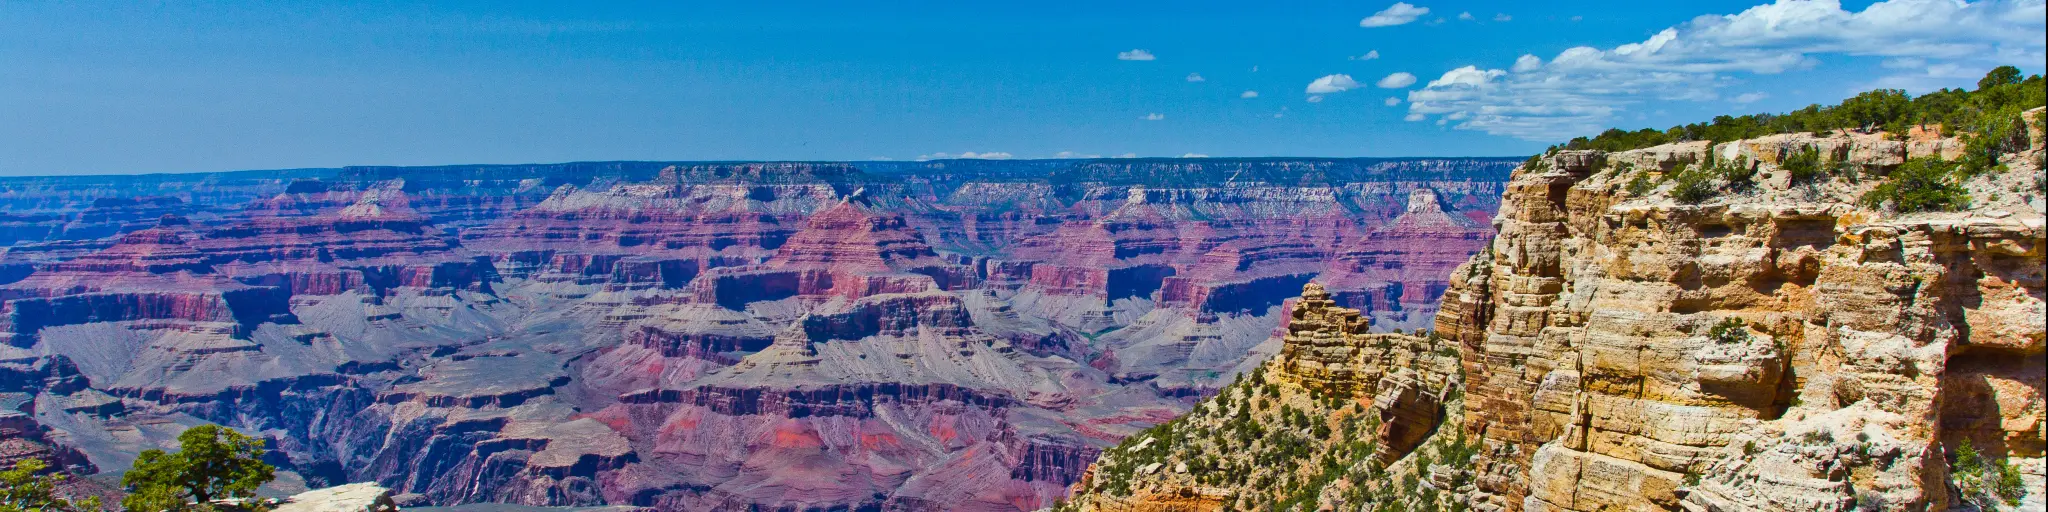 A great view of Grand Canyon National Park in a clear blue sky.